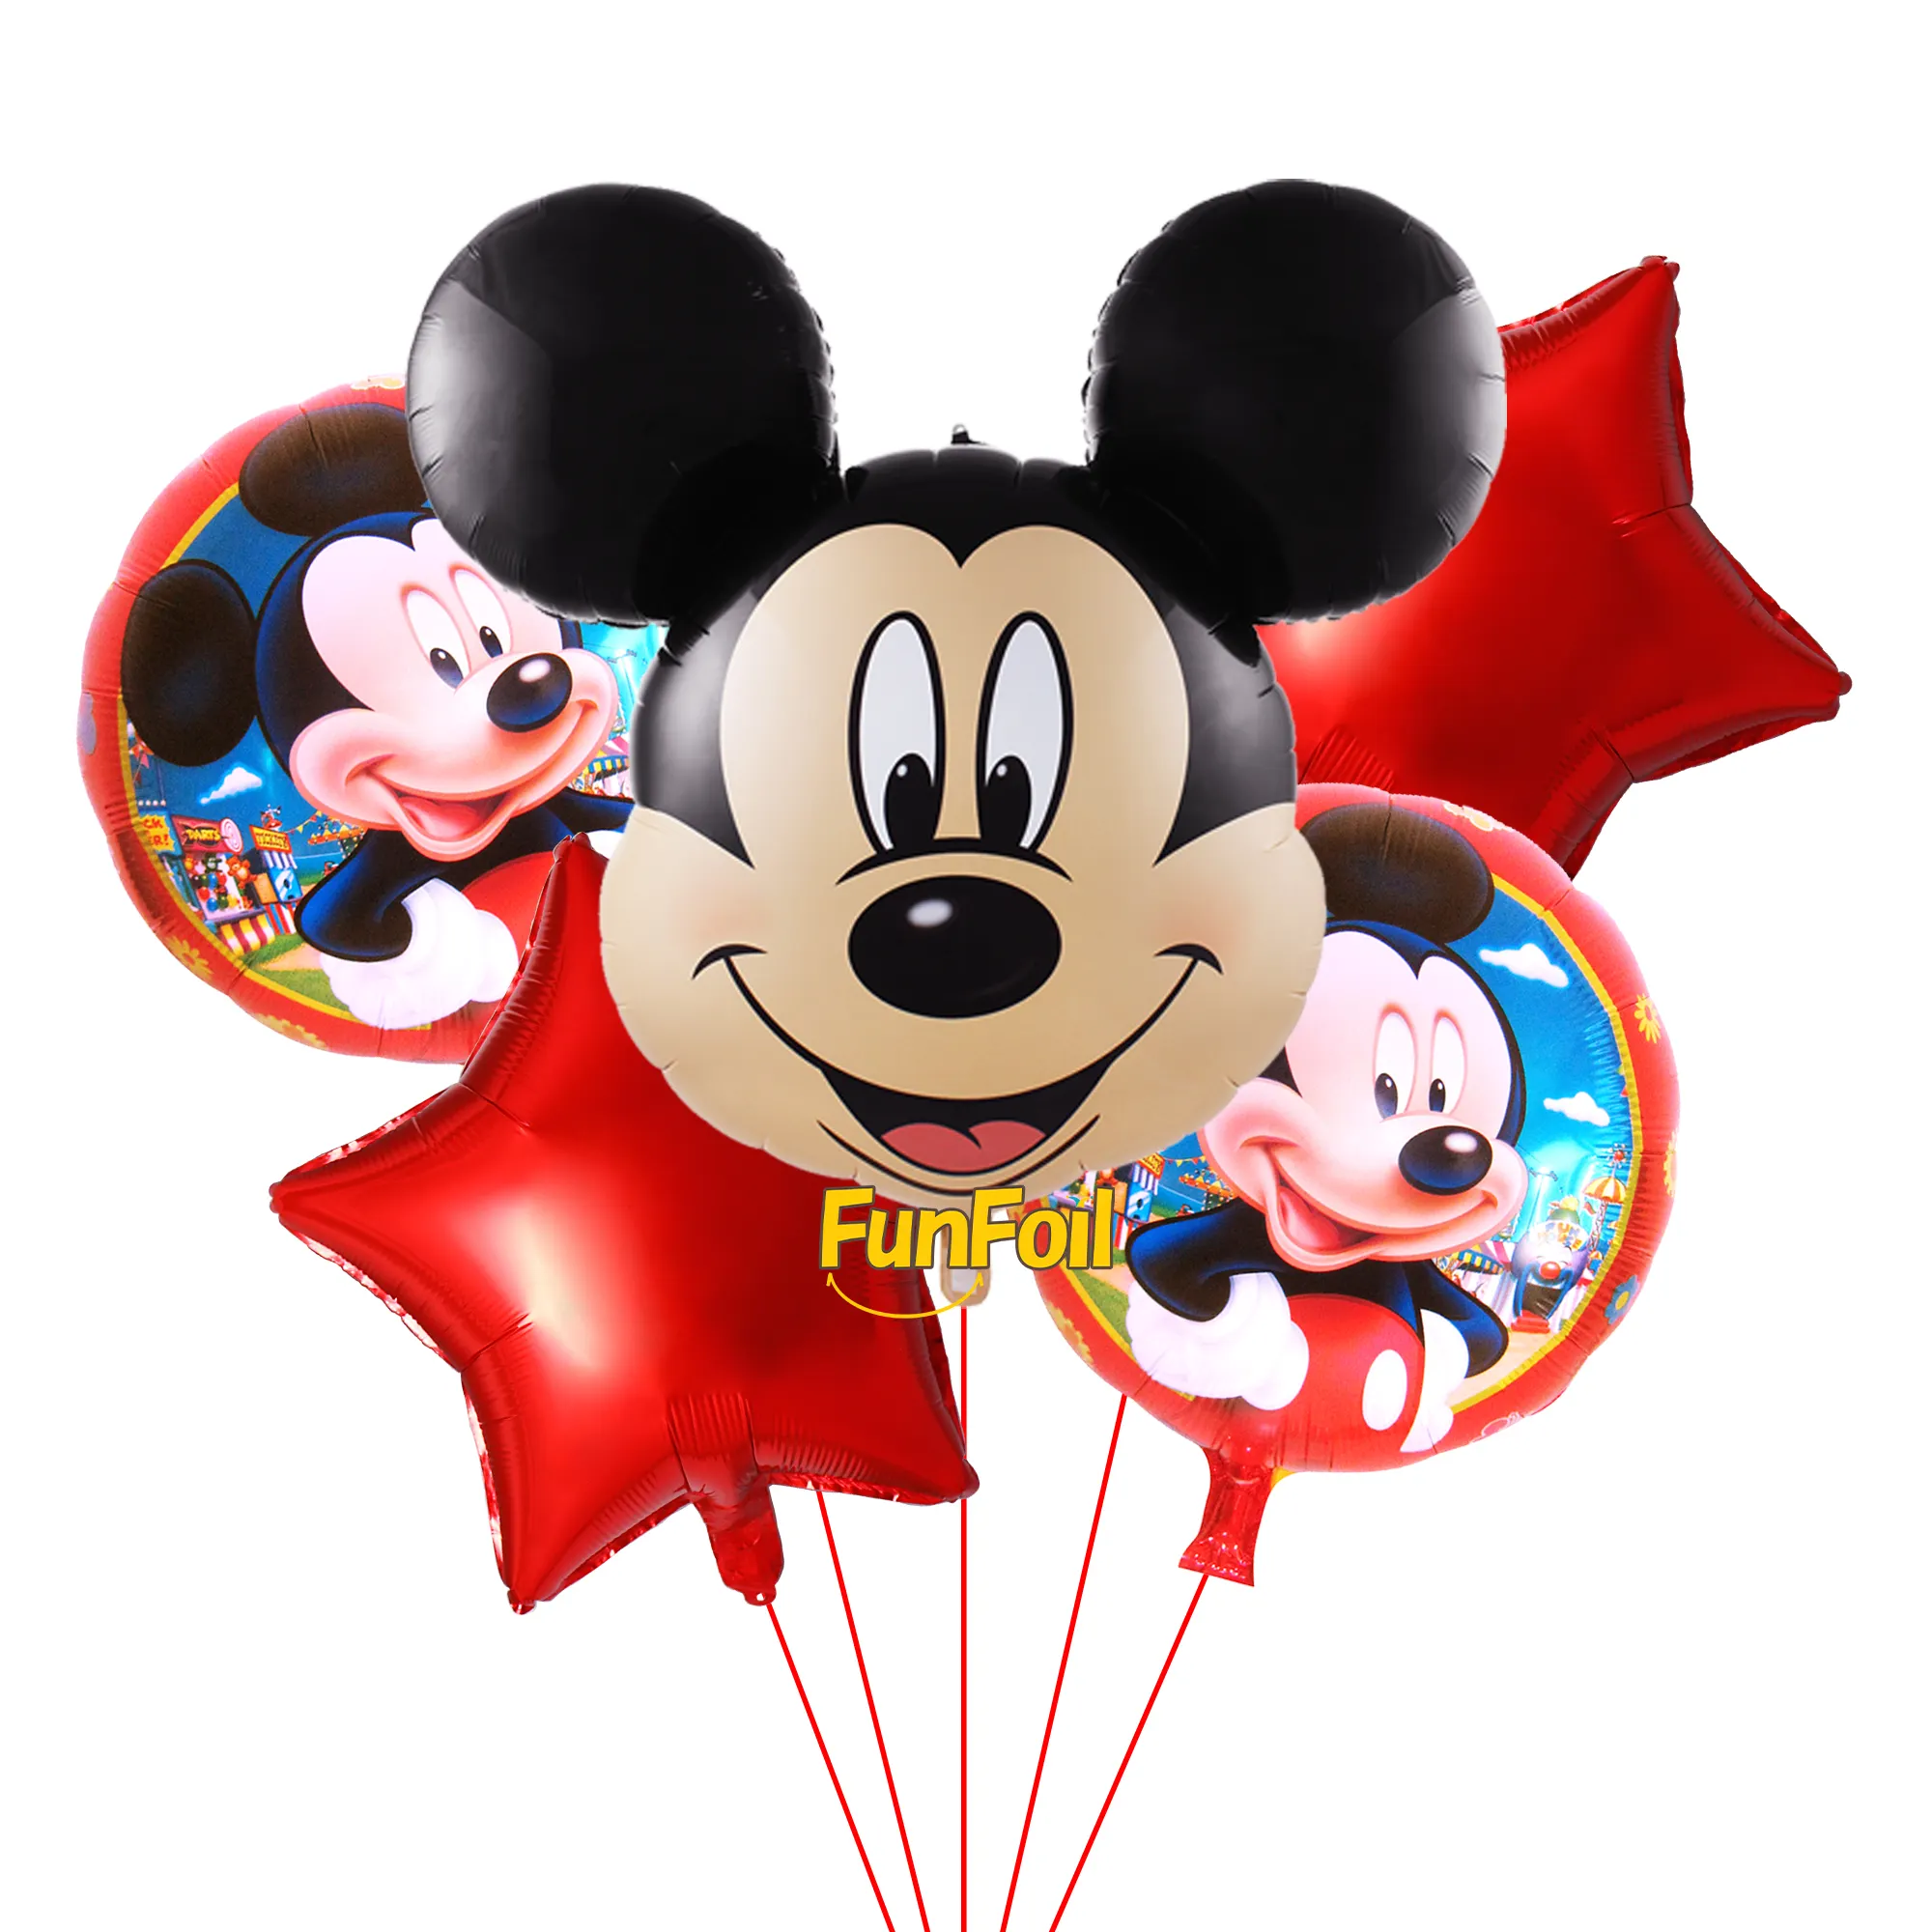 Decorations Foil Party balloons NEW ARRIVAL Helium/Air Party Micky Globo Minnie Mouse Cartoon Balloons